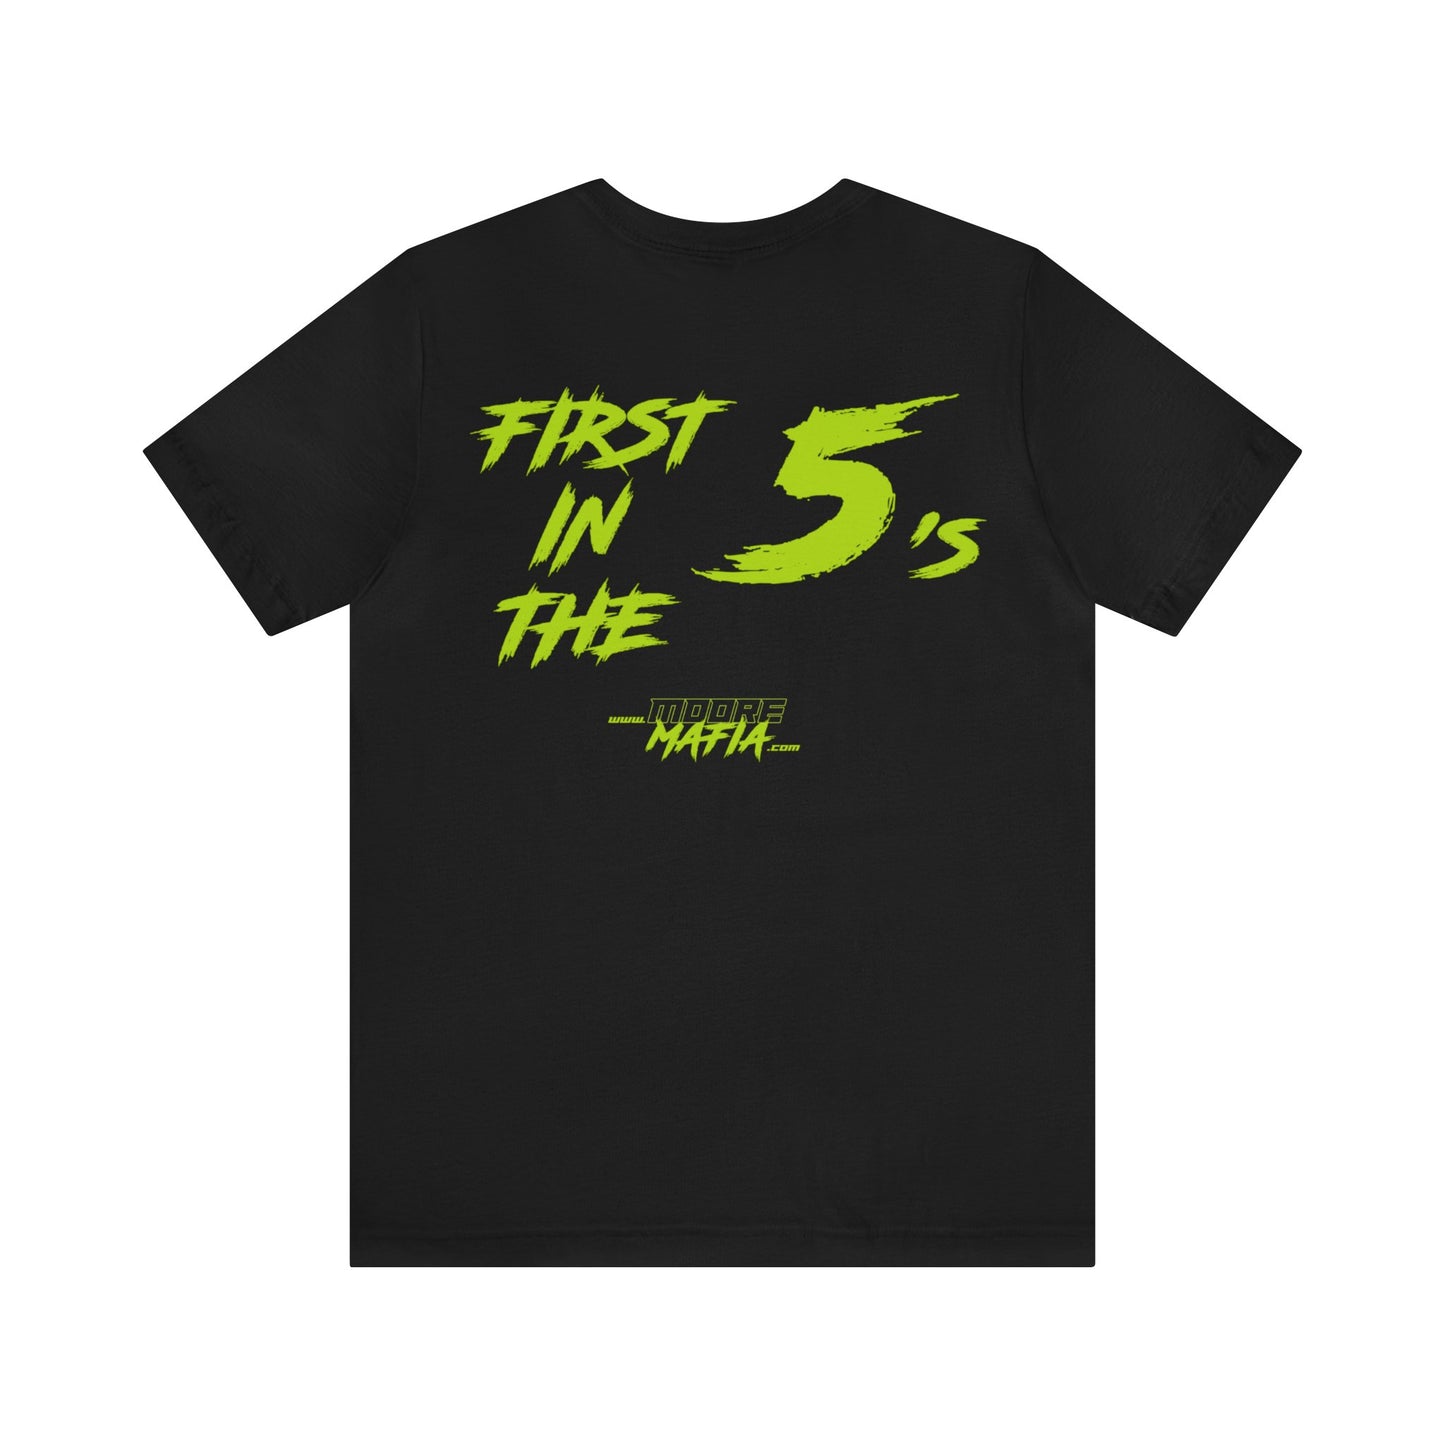 First In The 5's Unisex T-Shirt